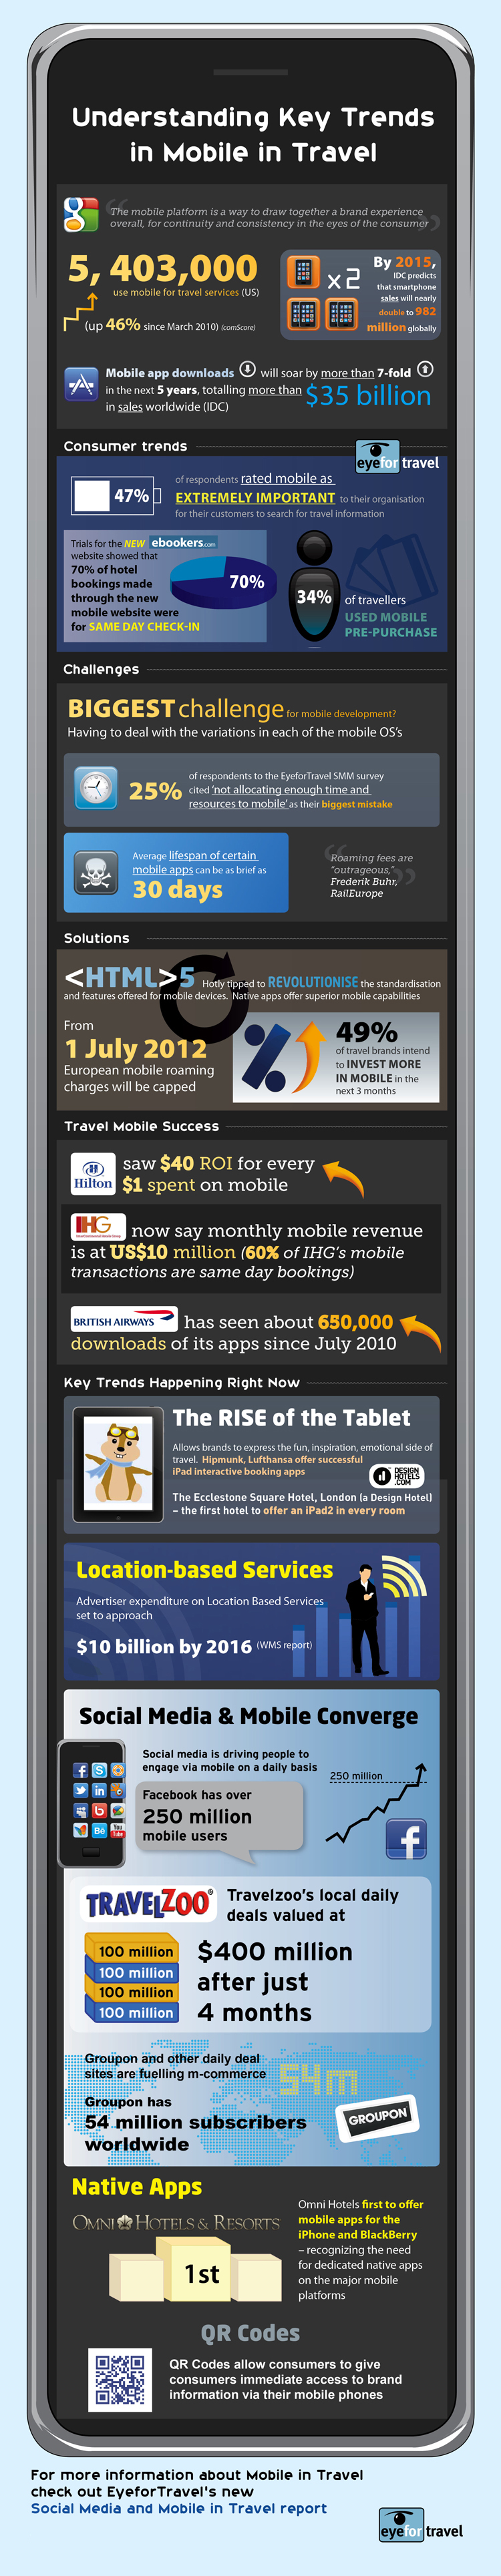 EyeforTravel Social Media and Mobile in Travel Infographic